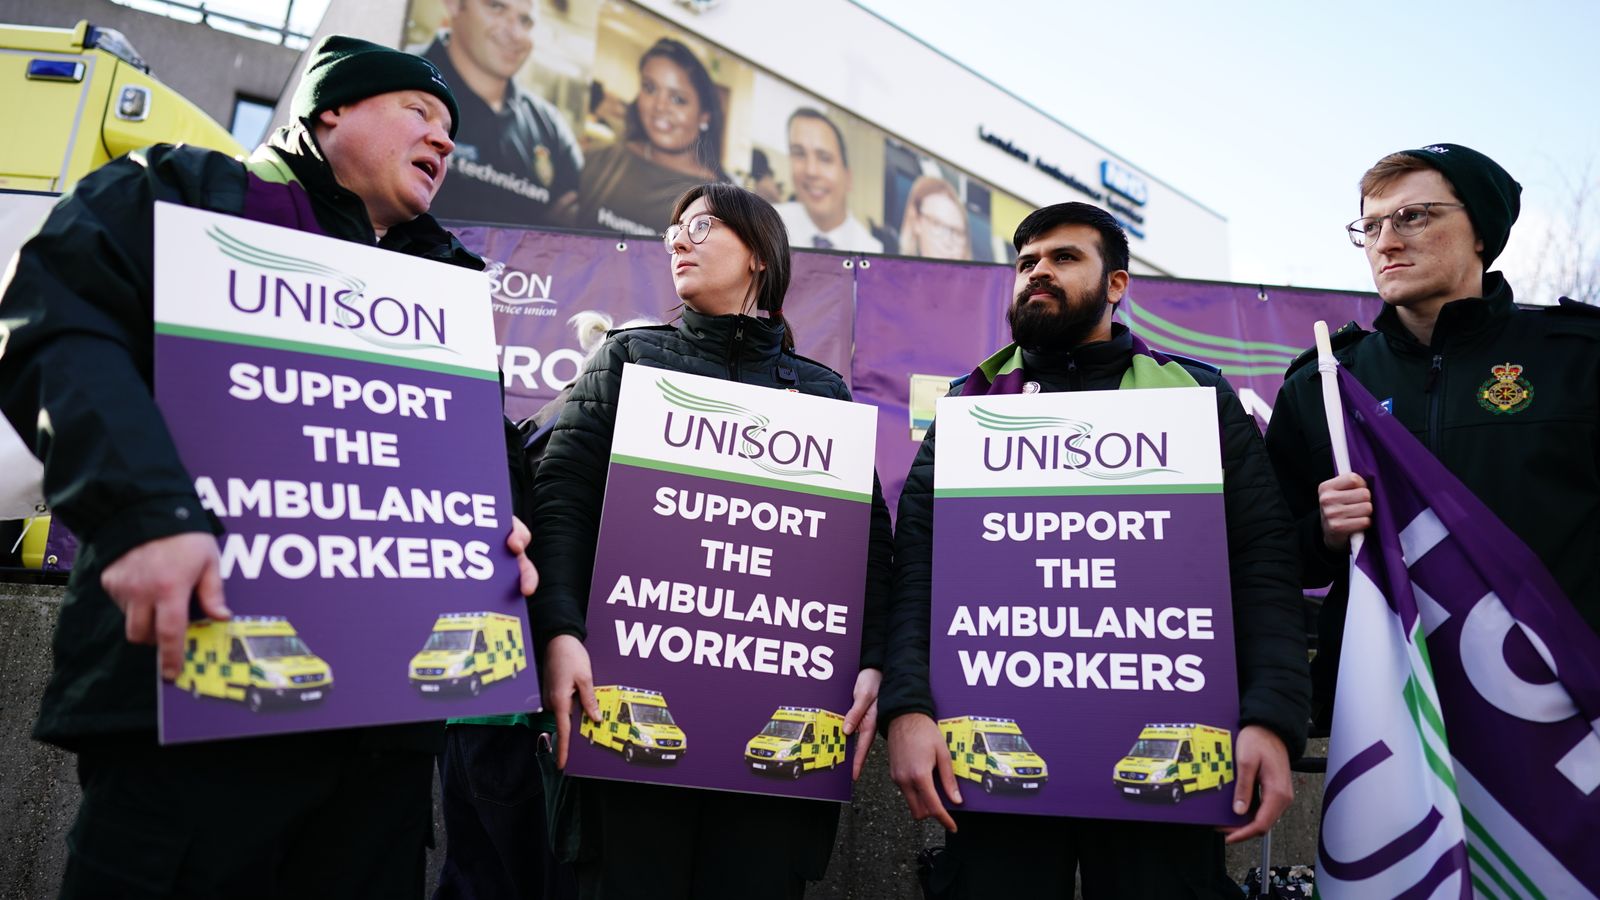 Rising public support for unions despite widespread strikes, Sky News poll suggests